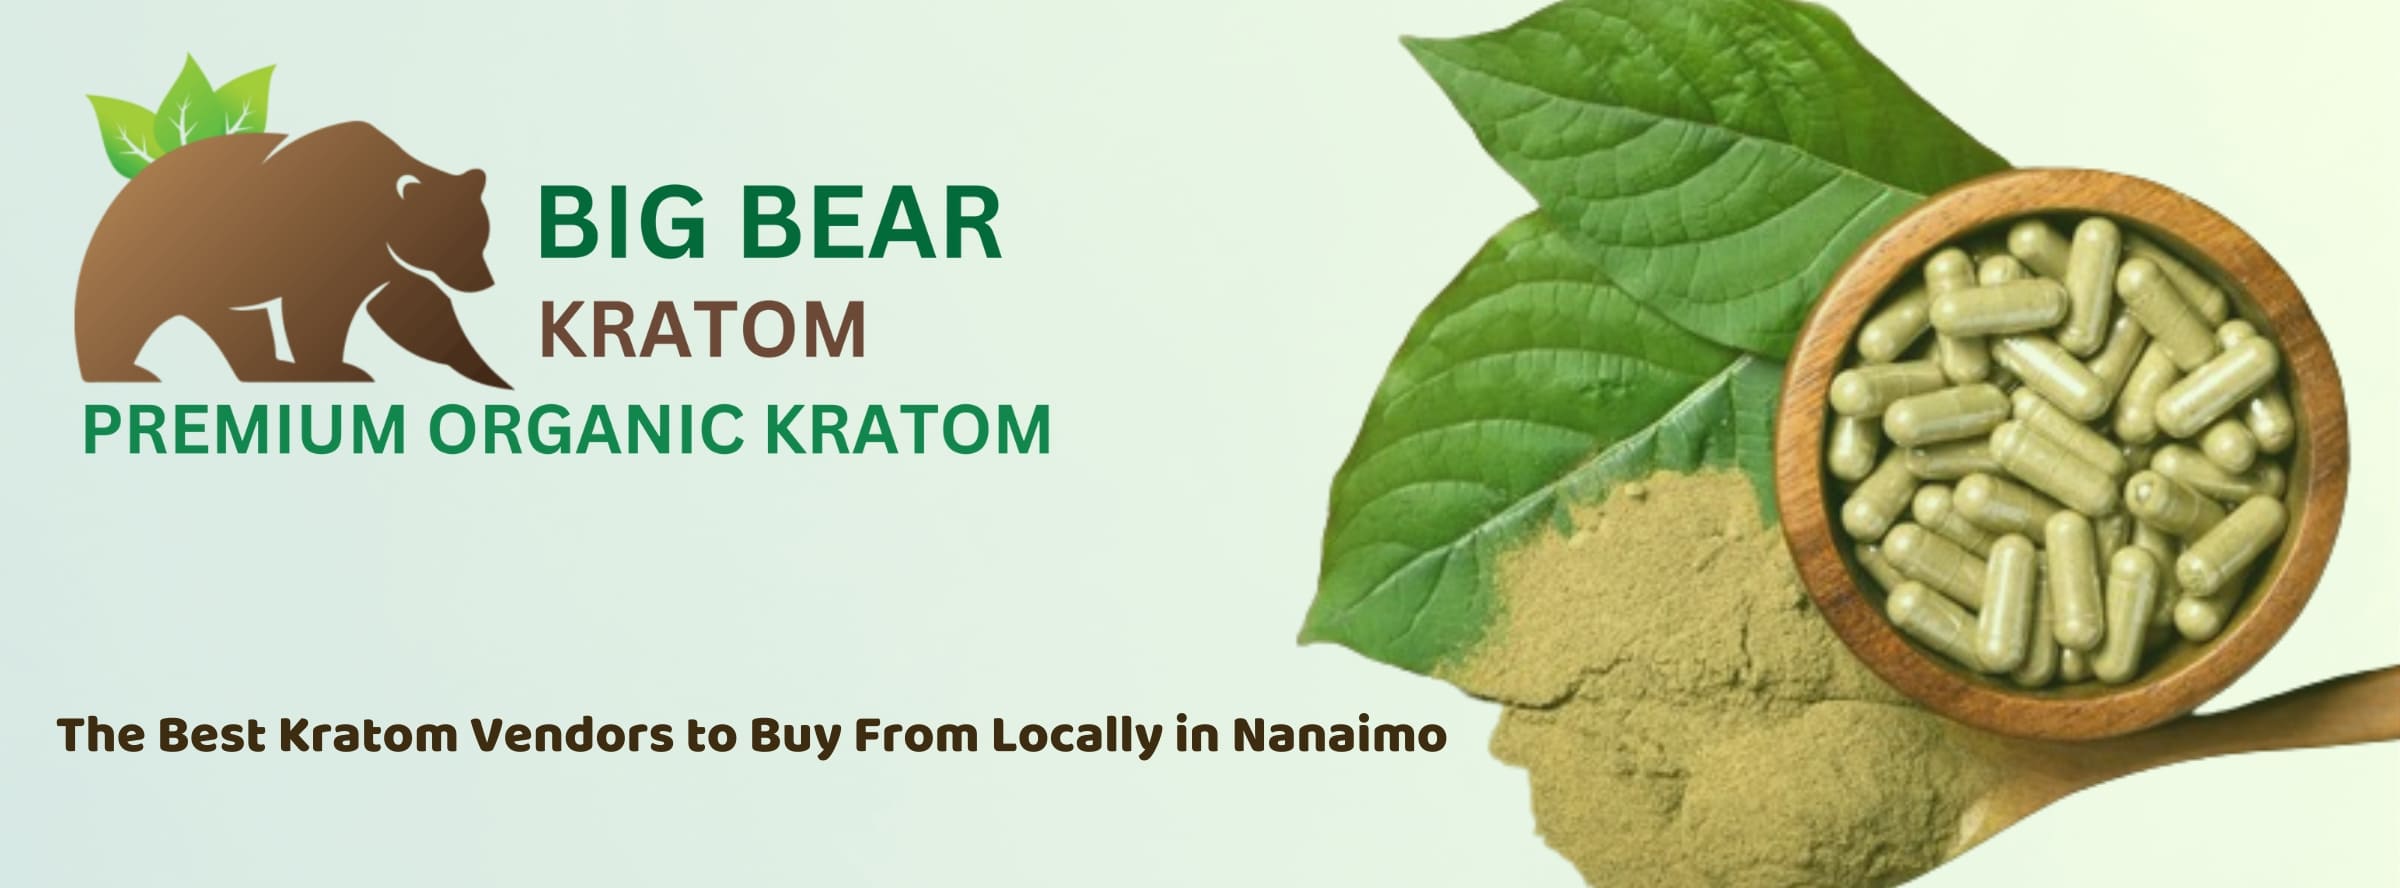 banner of best kratom vendors to buy from locally in nanaimo